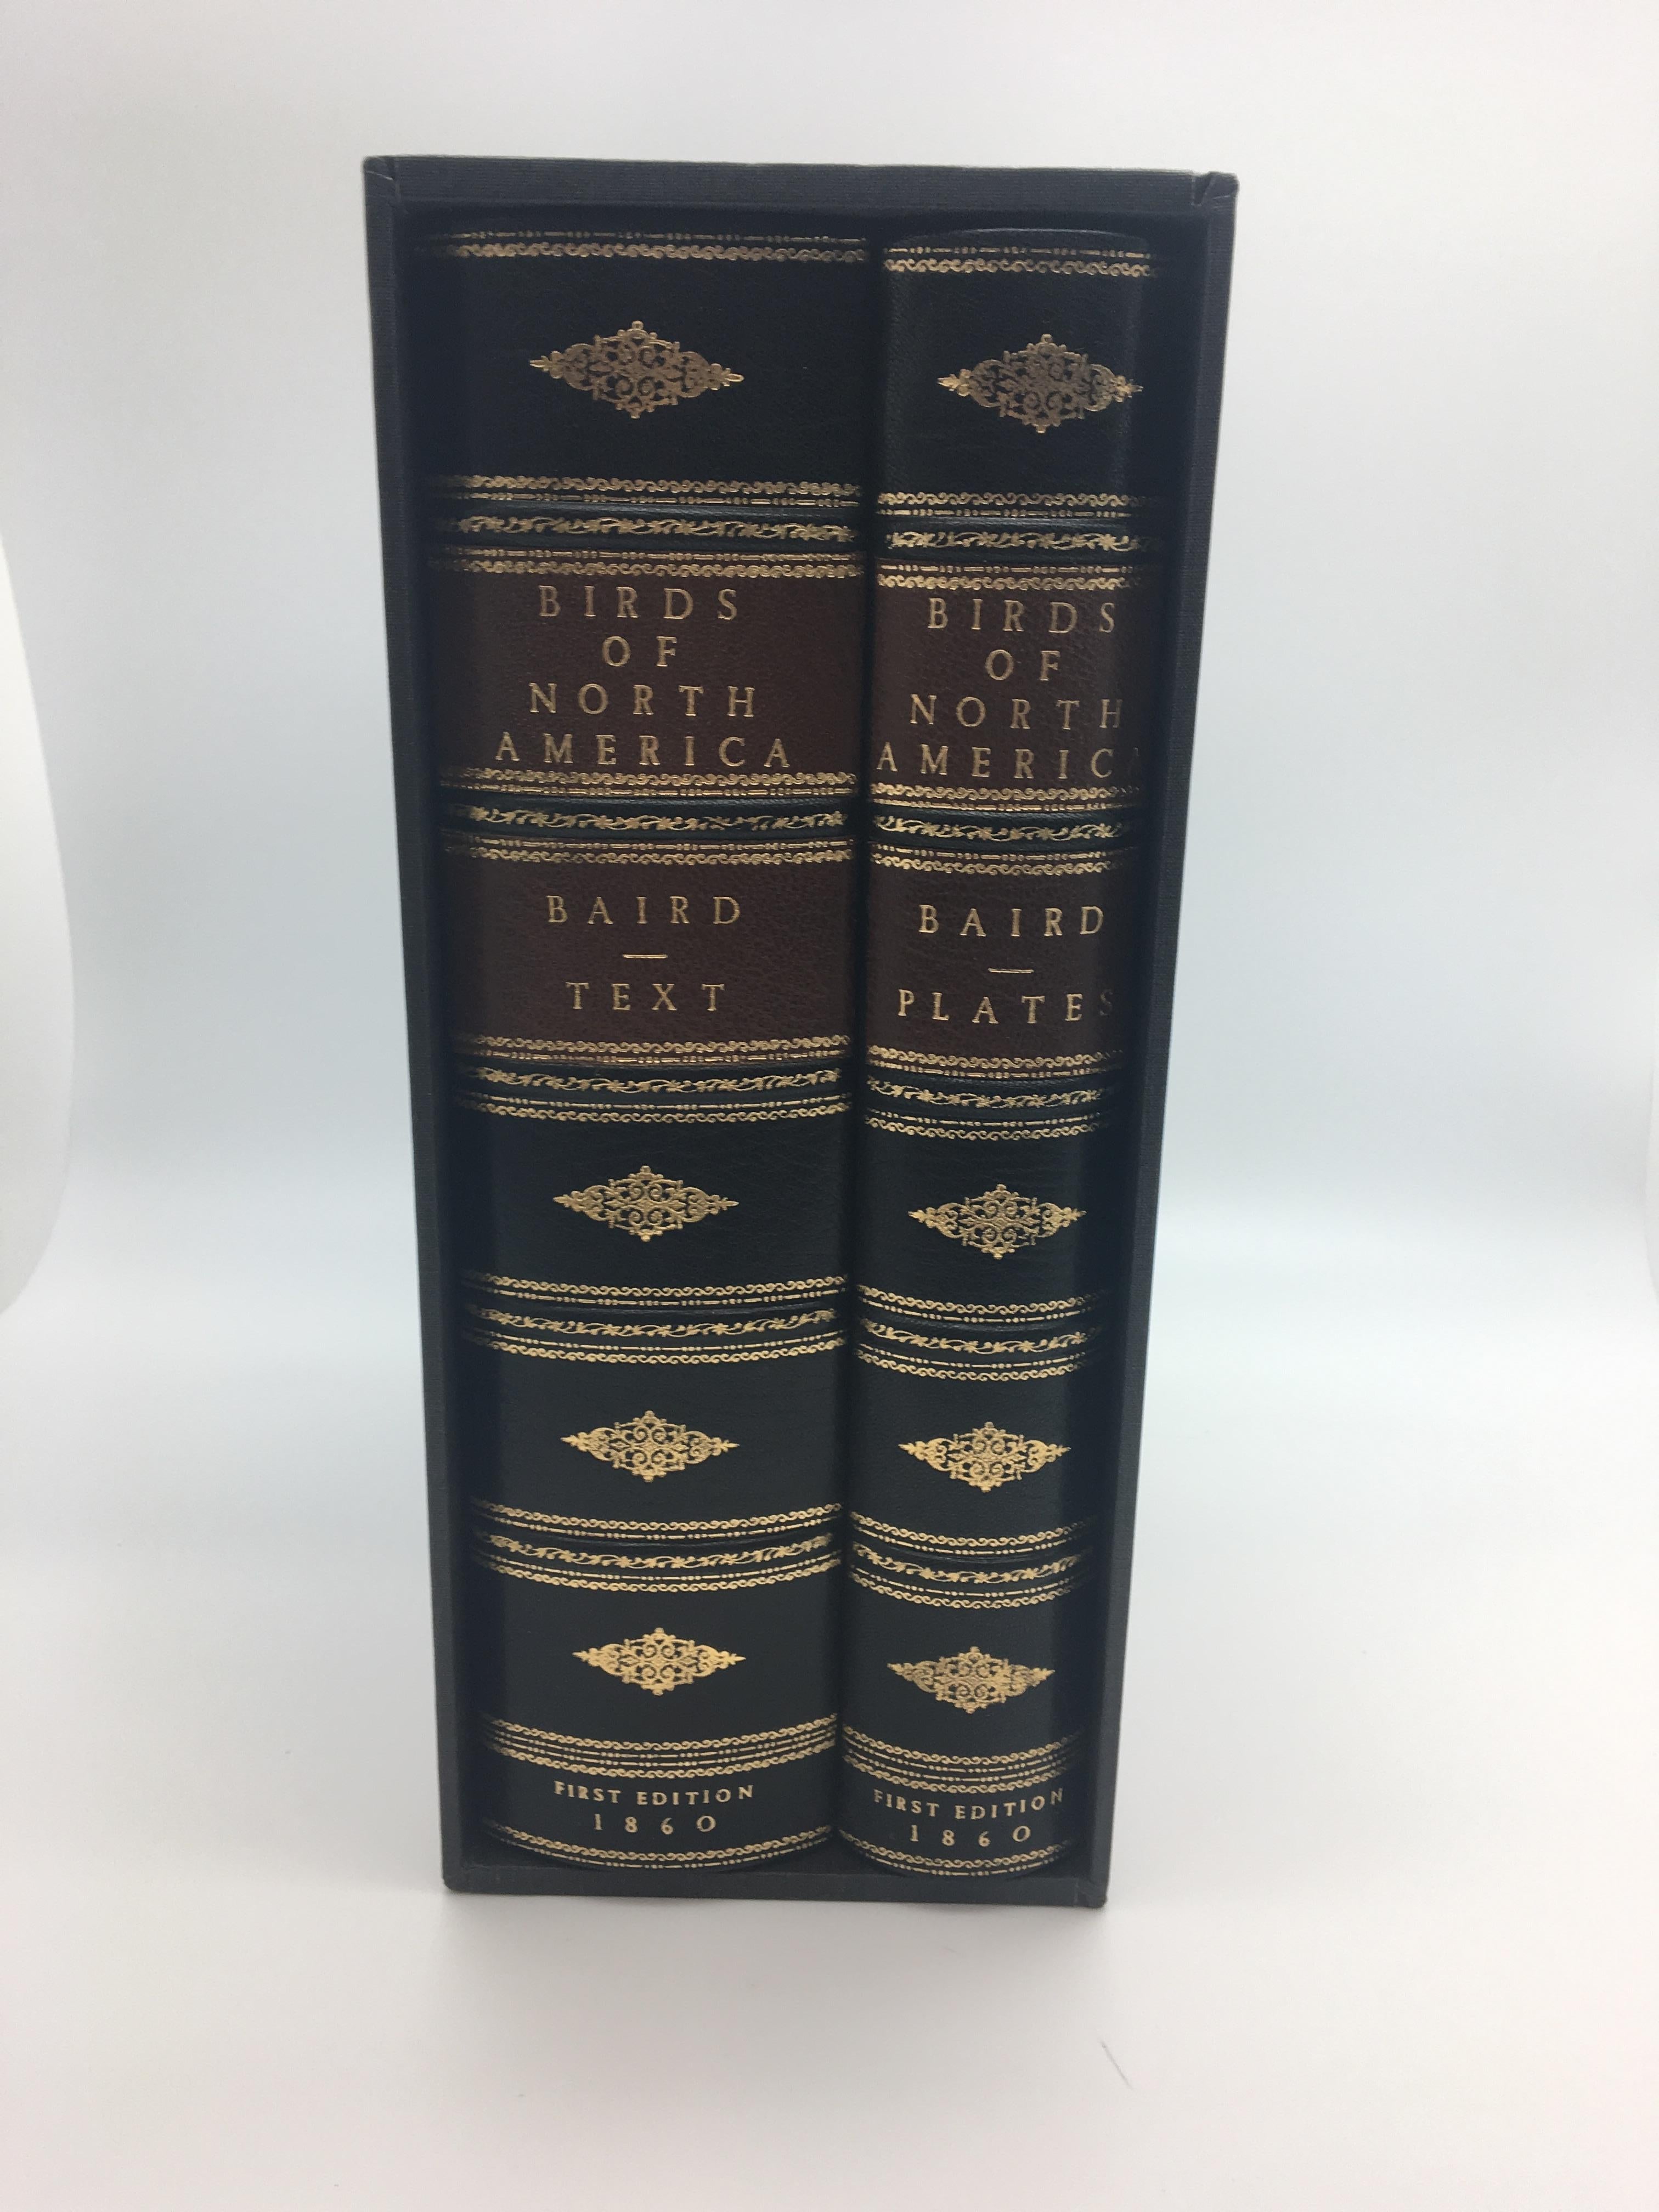 Paper Birds of North America by First Edition by Spencer Baird, 2-Volume Set, 1860